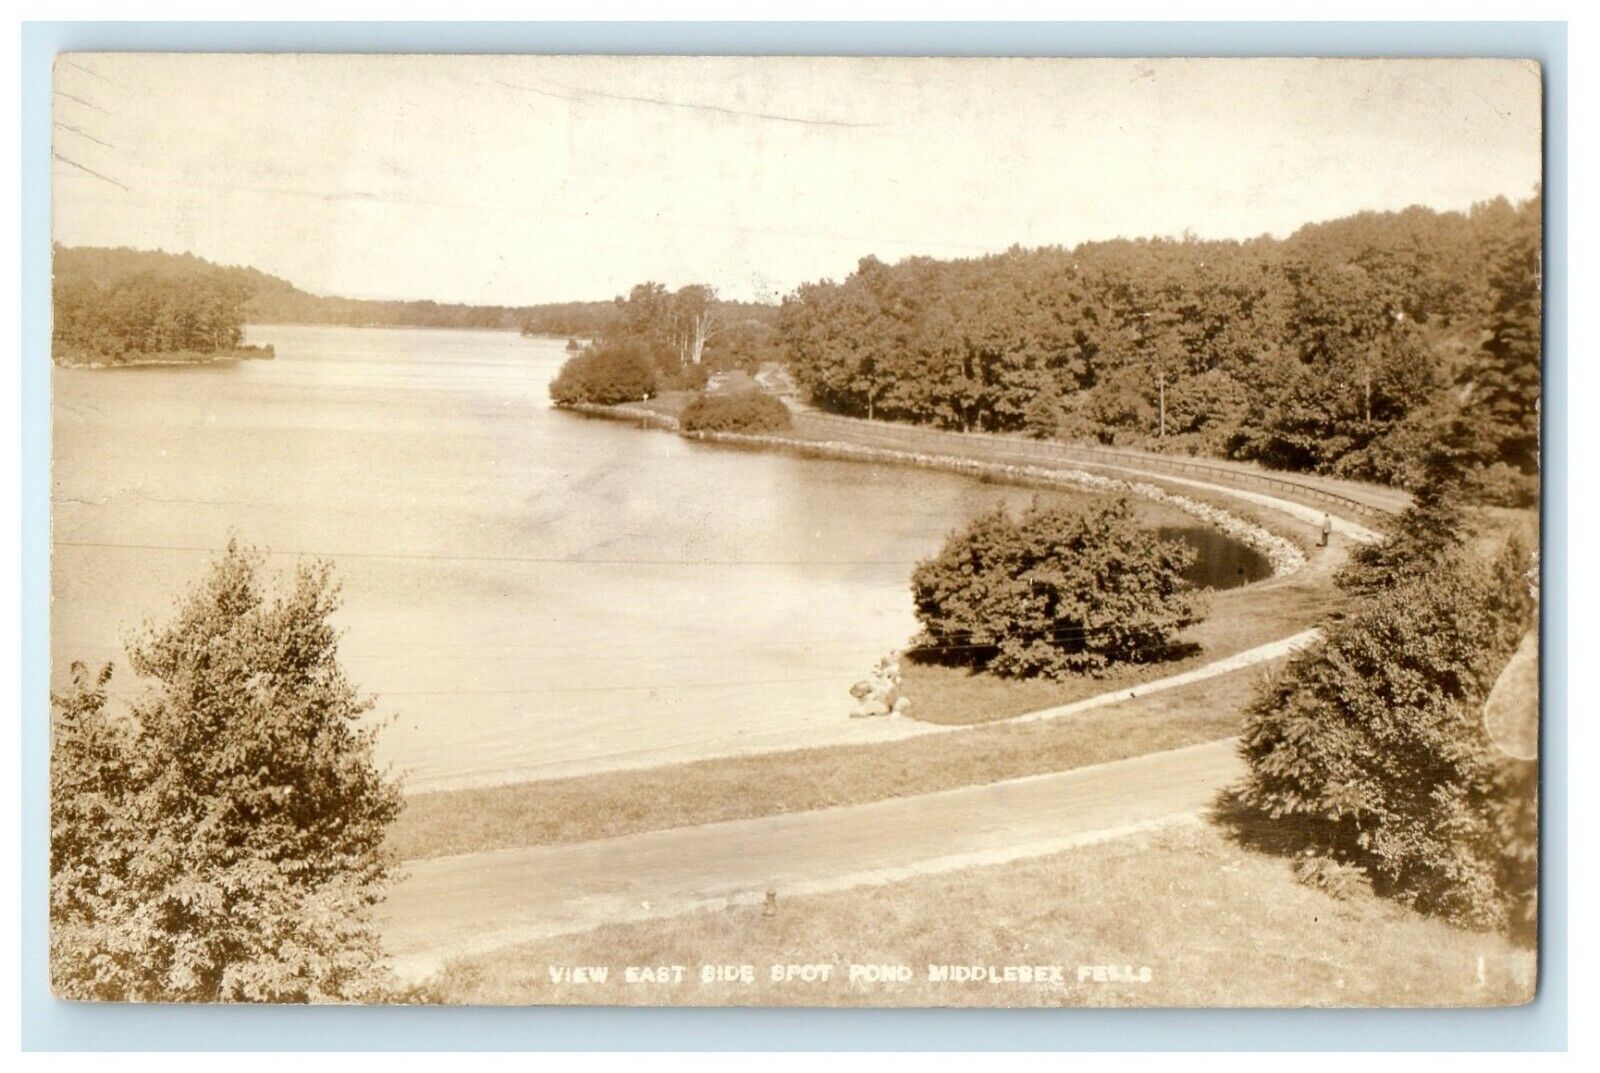 1915 View East Side Spot Pond Middlesex Fells MA RPPC Photo Antique Postcard